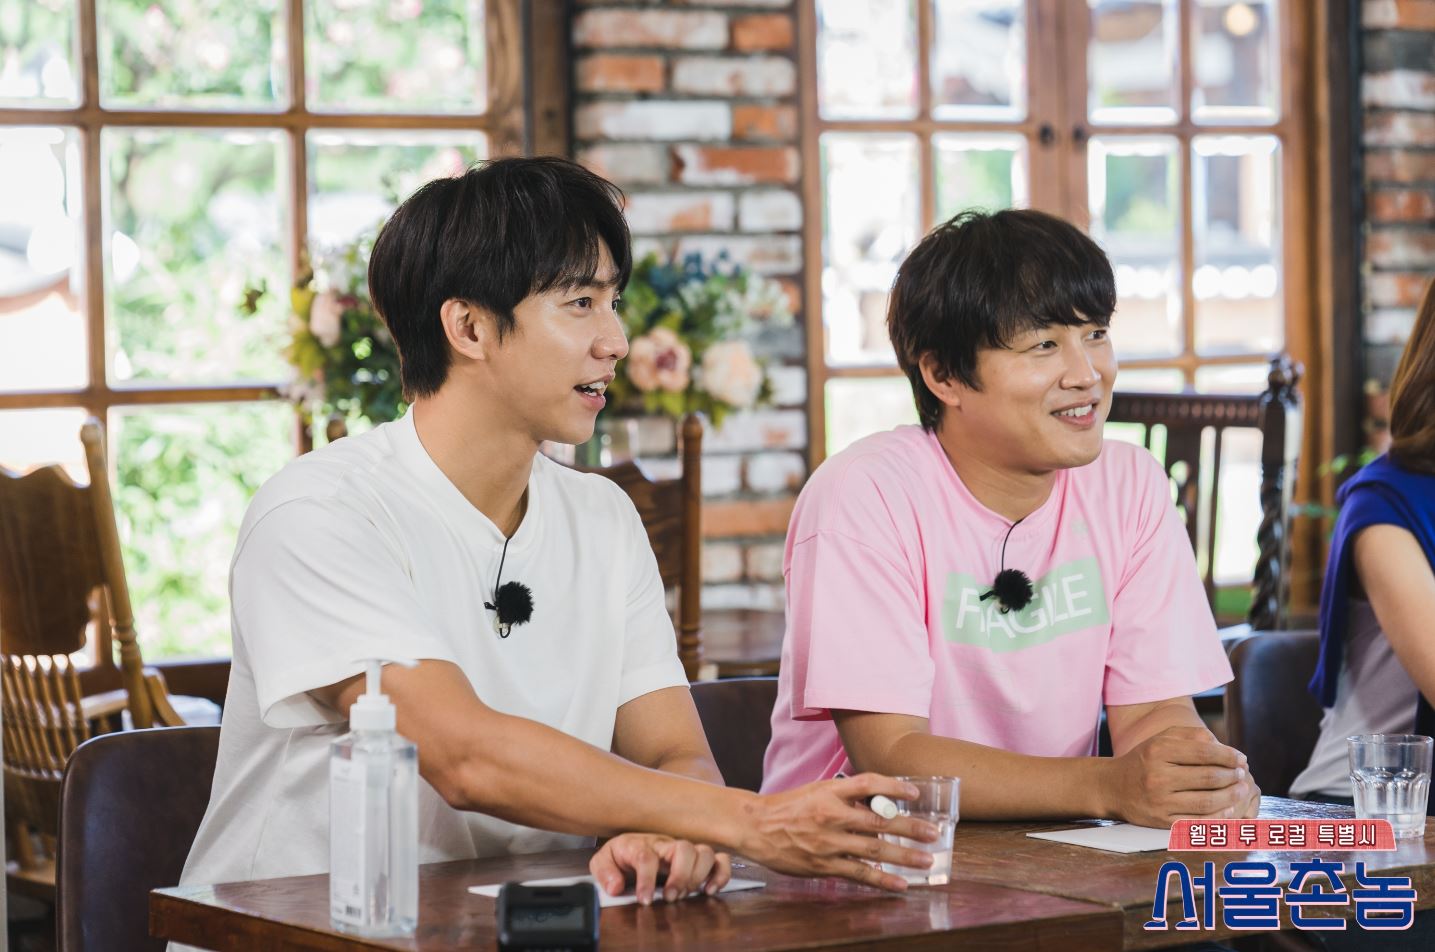 Ryu Ho-jin PD opened his mouth about Cha Tae-hyun and Lee Seung-gi who were together in Hometown Flex .On the 19th, End Interview was held with the regret of Ryu Ho-jin PD, who directed TVN Hometown Flex .Hometown Flex  is a hardcore local variety that the soul village Cha Tae-hyun, Lee Seung-gi, unfolds their memories in the hometown of local legends.Hometown Flex, which showed the charm of the region every week, went to various regions, and recalled memories by inviting stars from the region, not just travel programs.Ryu Ho-jin PD, who met on the day, expressed regret about Hometown Flex , which was unfortunately ending in Corona 19 situation.I wish I could have done more fun without Corona. Im sorry. I started thinking about the YG Entertainment direction.I was only now getting to know the casts preferences, but it ended more regretfully than I thought. I hope you promise next.Ryu Ho-jin PD, who directed 1 night and 2 days and had a long trip program YG Entertainment.I thought I wanted to do a program like Mr. Cha Tae-hyun, but I didnt refuse when I unexpectedly suggested it, he recalled.I am a local person, but it was an idea that came up when I went on a vacation in Busan.I met my friends in Gong Yoo as a child, and I was more active and free, and I started to think about it. What about the two MCs that Ryu Ho-jin saw? They are so good people and have a lot of experience in entertainment. I know what they are good at.In particular, Sunggi is a person who has memories of childhood near the generation of the 90s, and Cha Tae-hyun is characterized by representing a generation, he said. Sunggi likes food, and Cha Tae-hyun considers the characteristics of scenery and area more important.That conflicting concern interacted, he said.There was a difference in the way it was going. The win is really like MC. I know how to draw laughter and I am funny.Cha Tae-hyun is a mentor on the field, who draws potential performance with just one reaction. Finds hidden characters. And organizes them.So there is a synergy between the two. It is accurate to do well, so it seems that it was easy for each other to work. Hometown Flex , which ended with the last 20 days, Cha Tae-hyun and Lee Seung-gi also left a regret.Ryu Ho-jin PD said, I am sorry for both of you, but it was hard to go to Corona 19 city and take a half-shot.I hope we stop for a while before the local and star burnout, and then meet local local citizens more comfortably without a mask.The celebrity face was brighter, and when I ate food, I felt the affection of Koreans and I was afraid to shoot without being afraid. Of course, it is regrettable to quit. In fact, as Corona 19 became worse and worse, Hometown Flex  was also filmed thoroughly, and Ryu Ho-jin PD said, The viewers were worried too.So I did a little more Careful, he said.In fact, safety is a priority when comparing fun and safety.I saved this program, and I thought about it when Corona 19 was over, and people could eat and eat comfortably, and I thought about it. (Continuing on Interview2)Photo = tvN